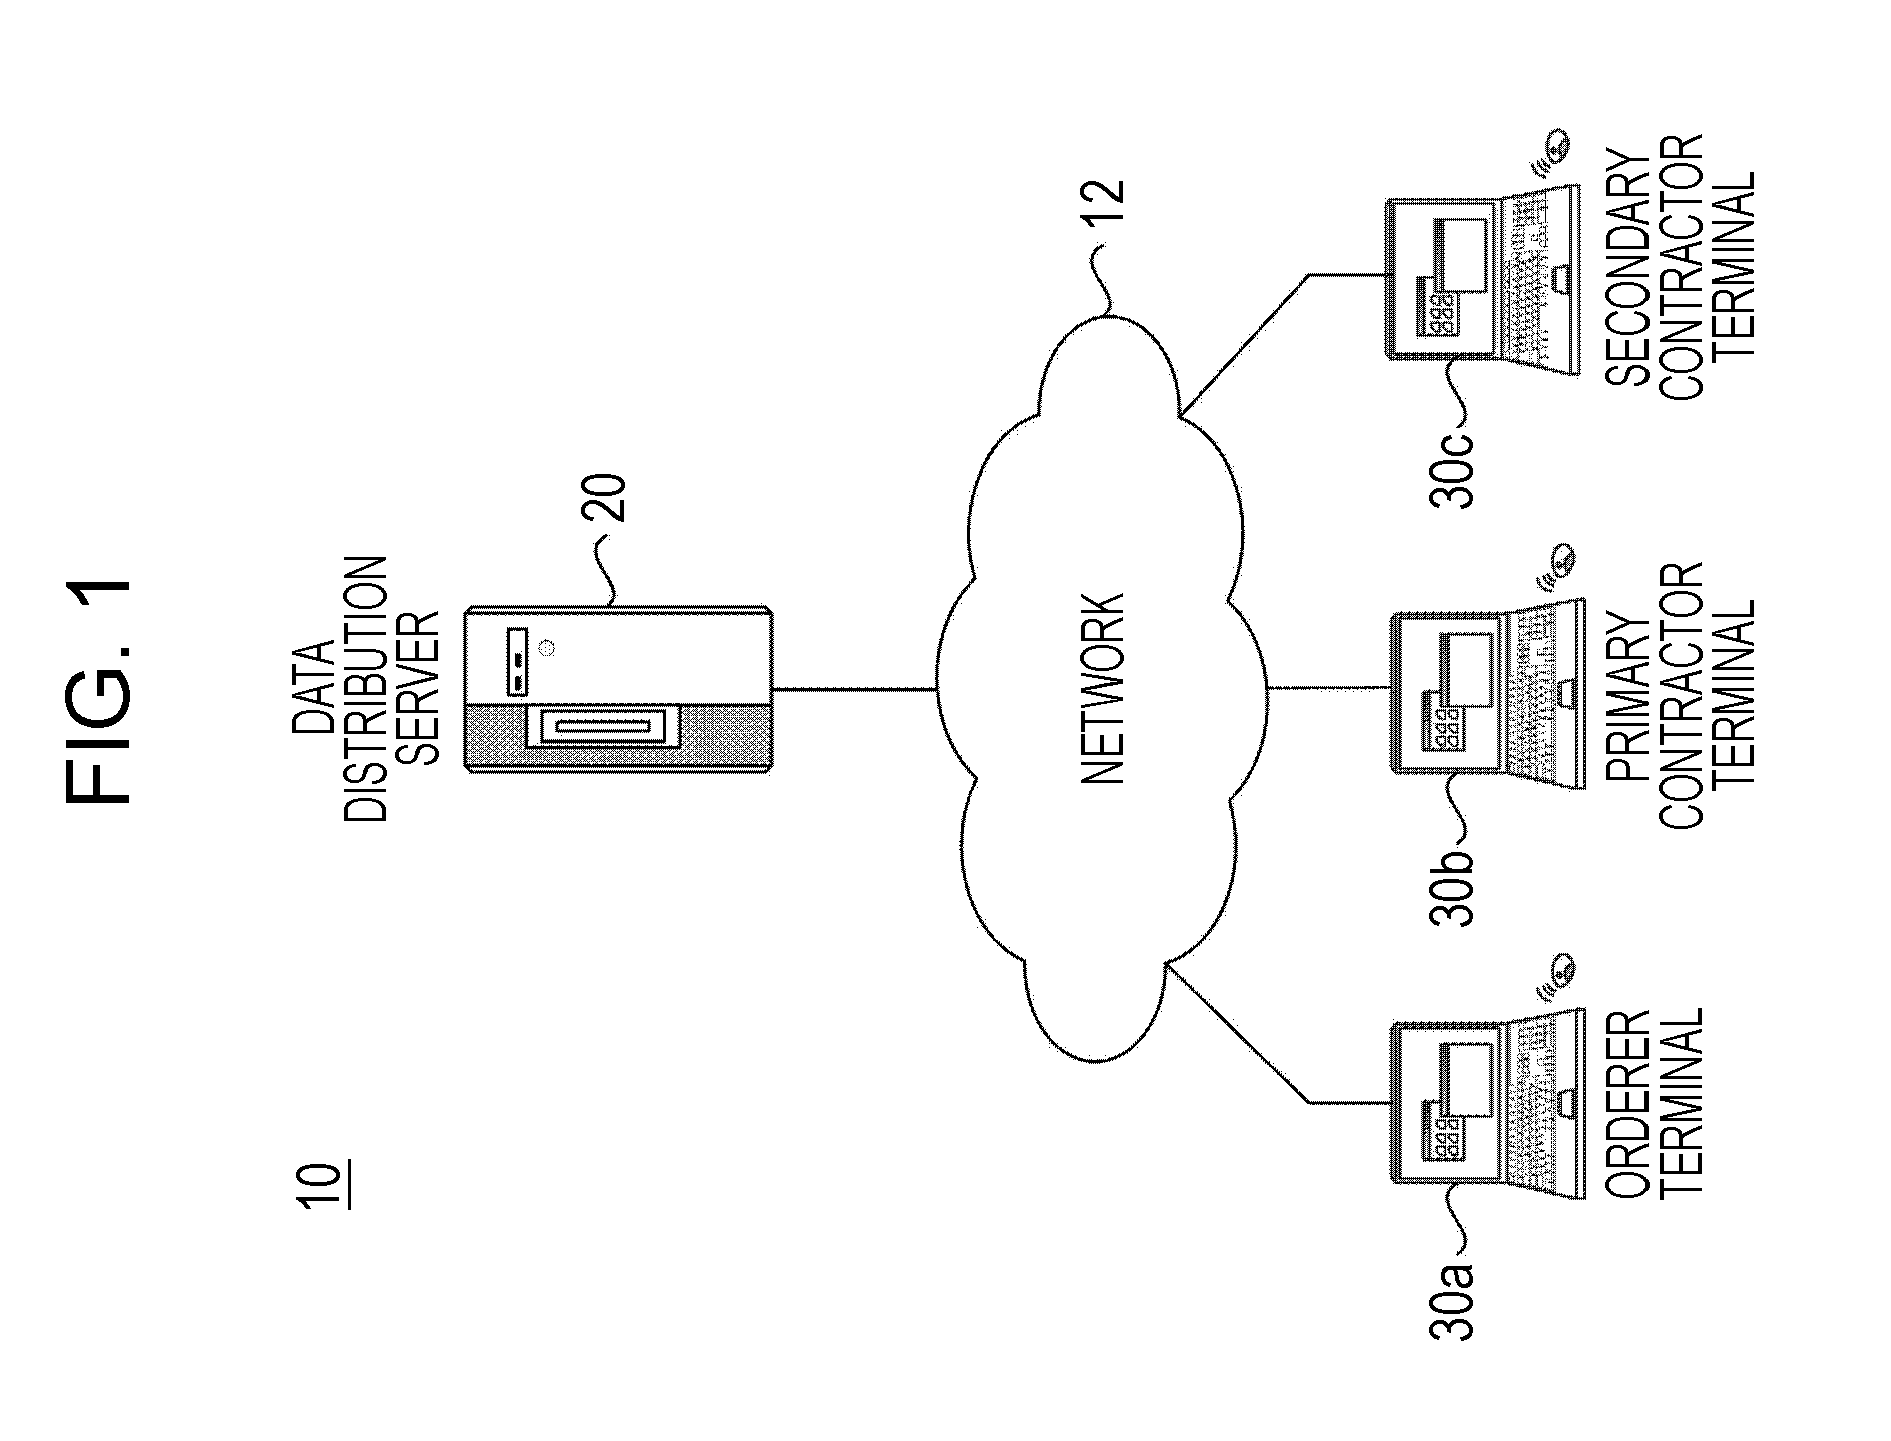 Generating a distrubition package having an access control execution program for implementing an access control mechanism and loading unit for a client